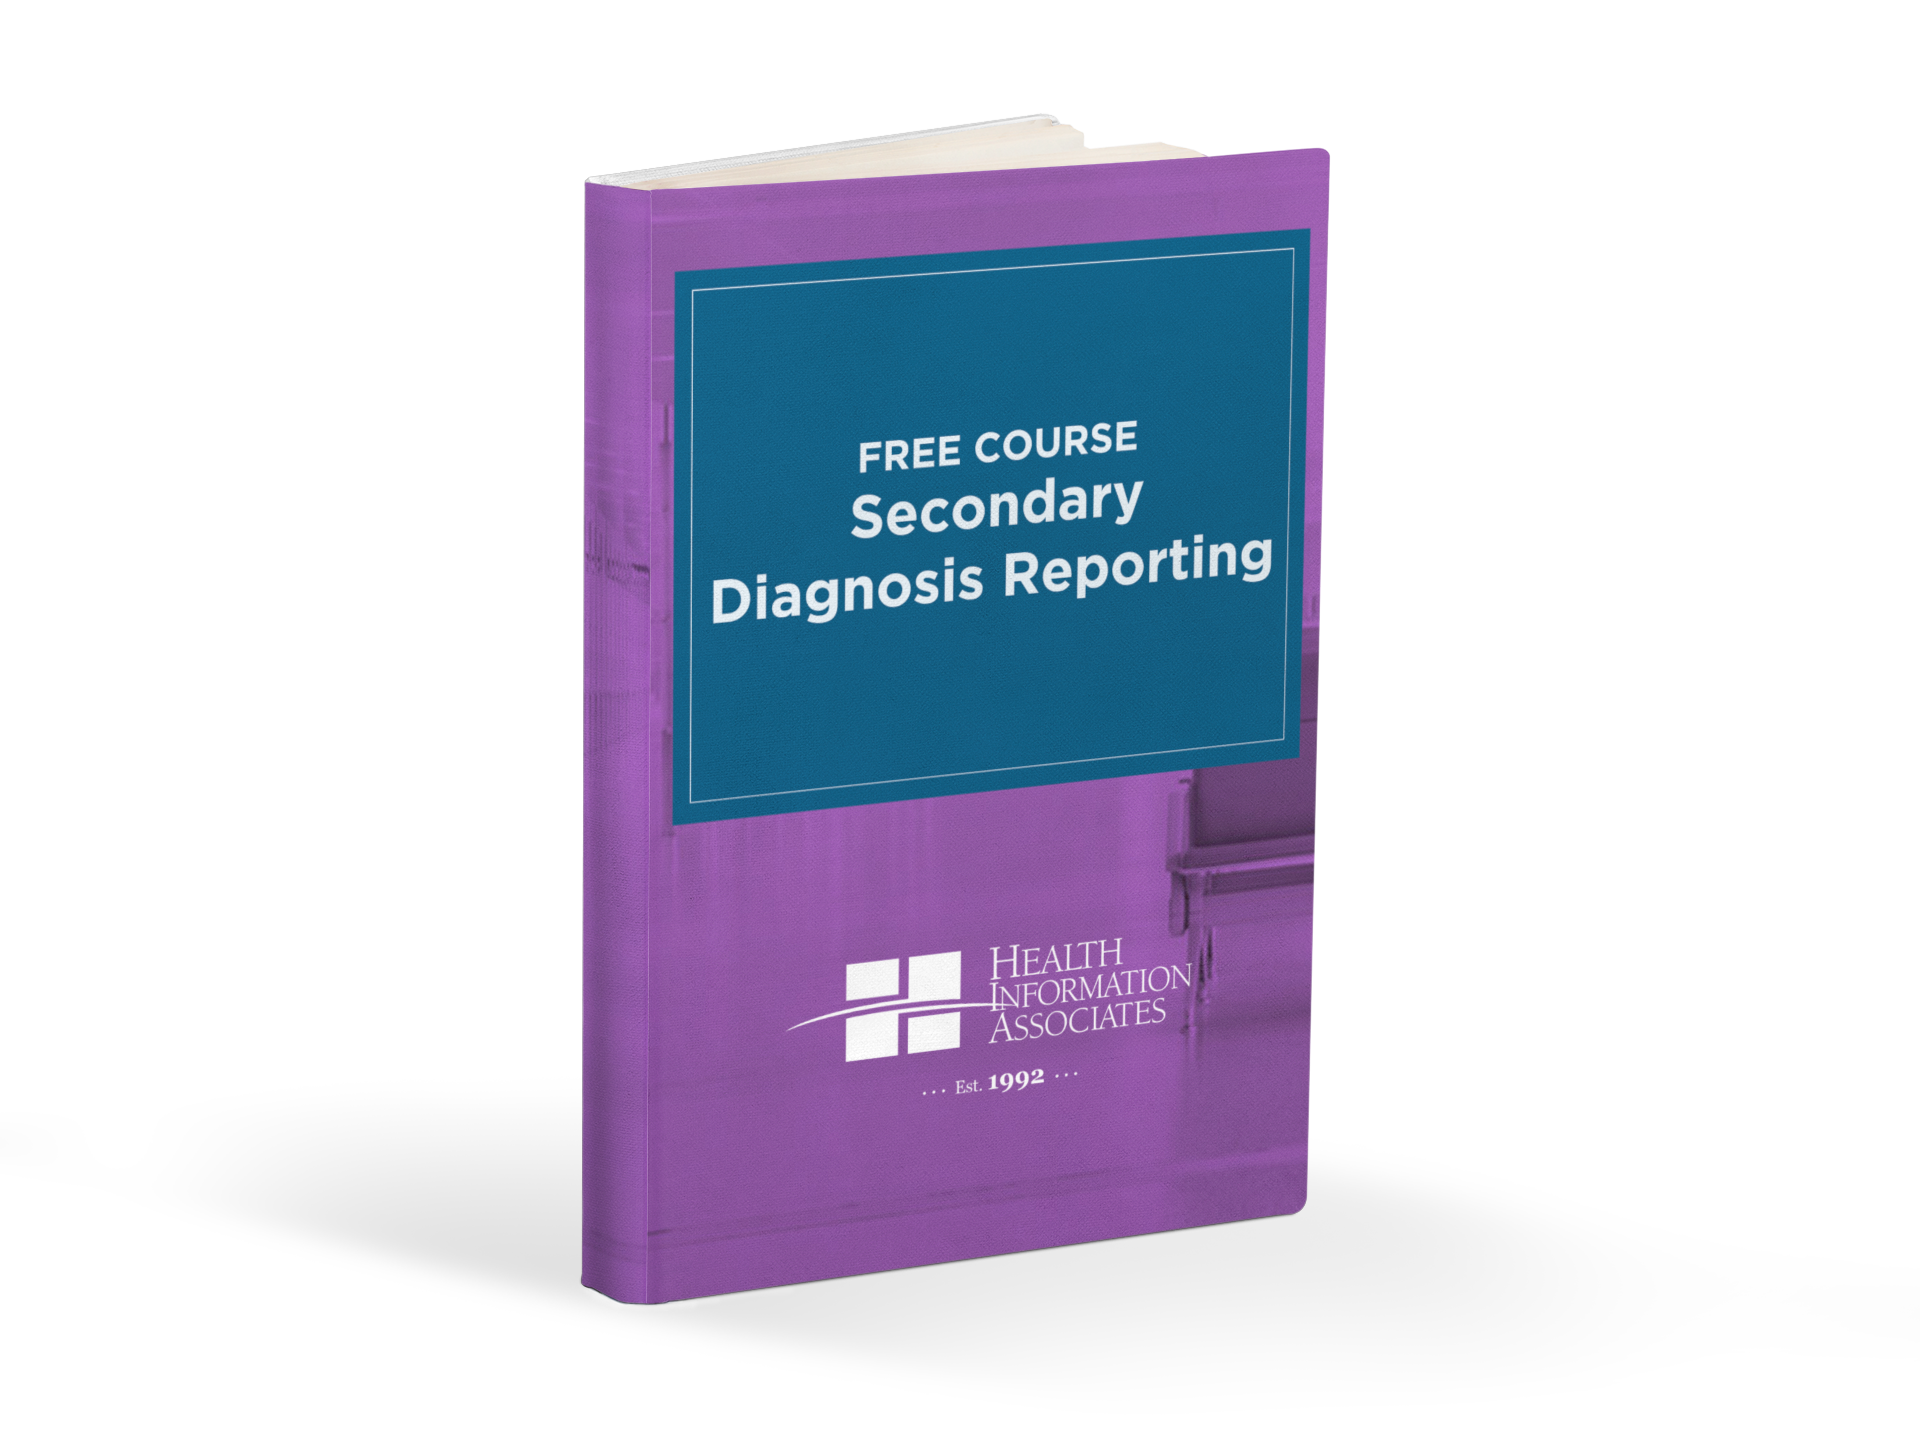 Secondary Diagnosis Reporting Free Course